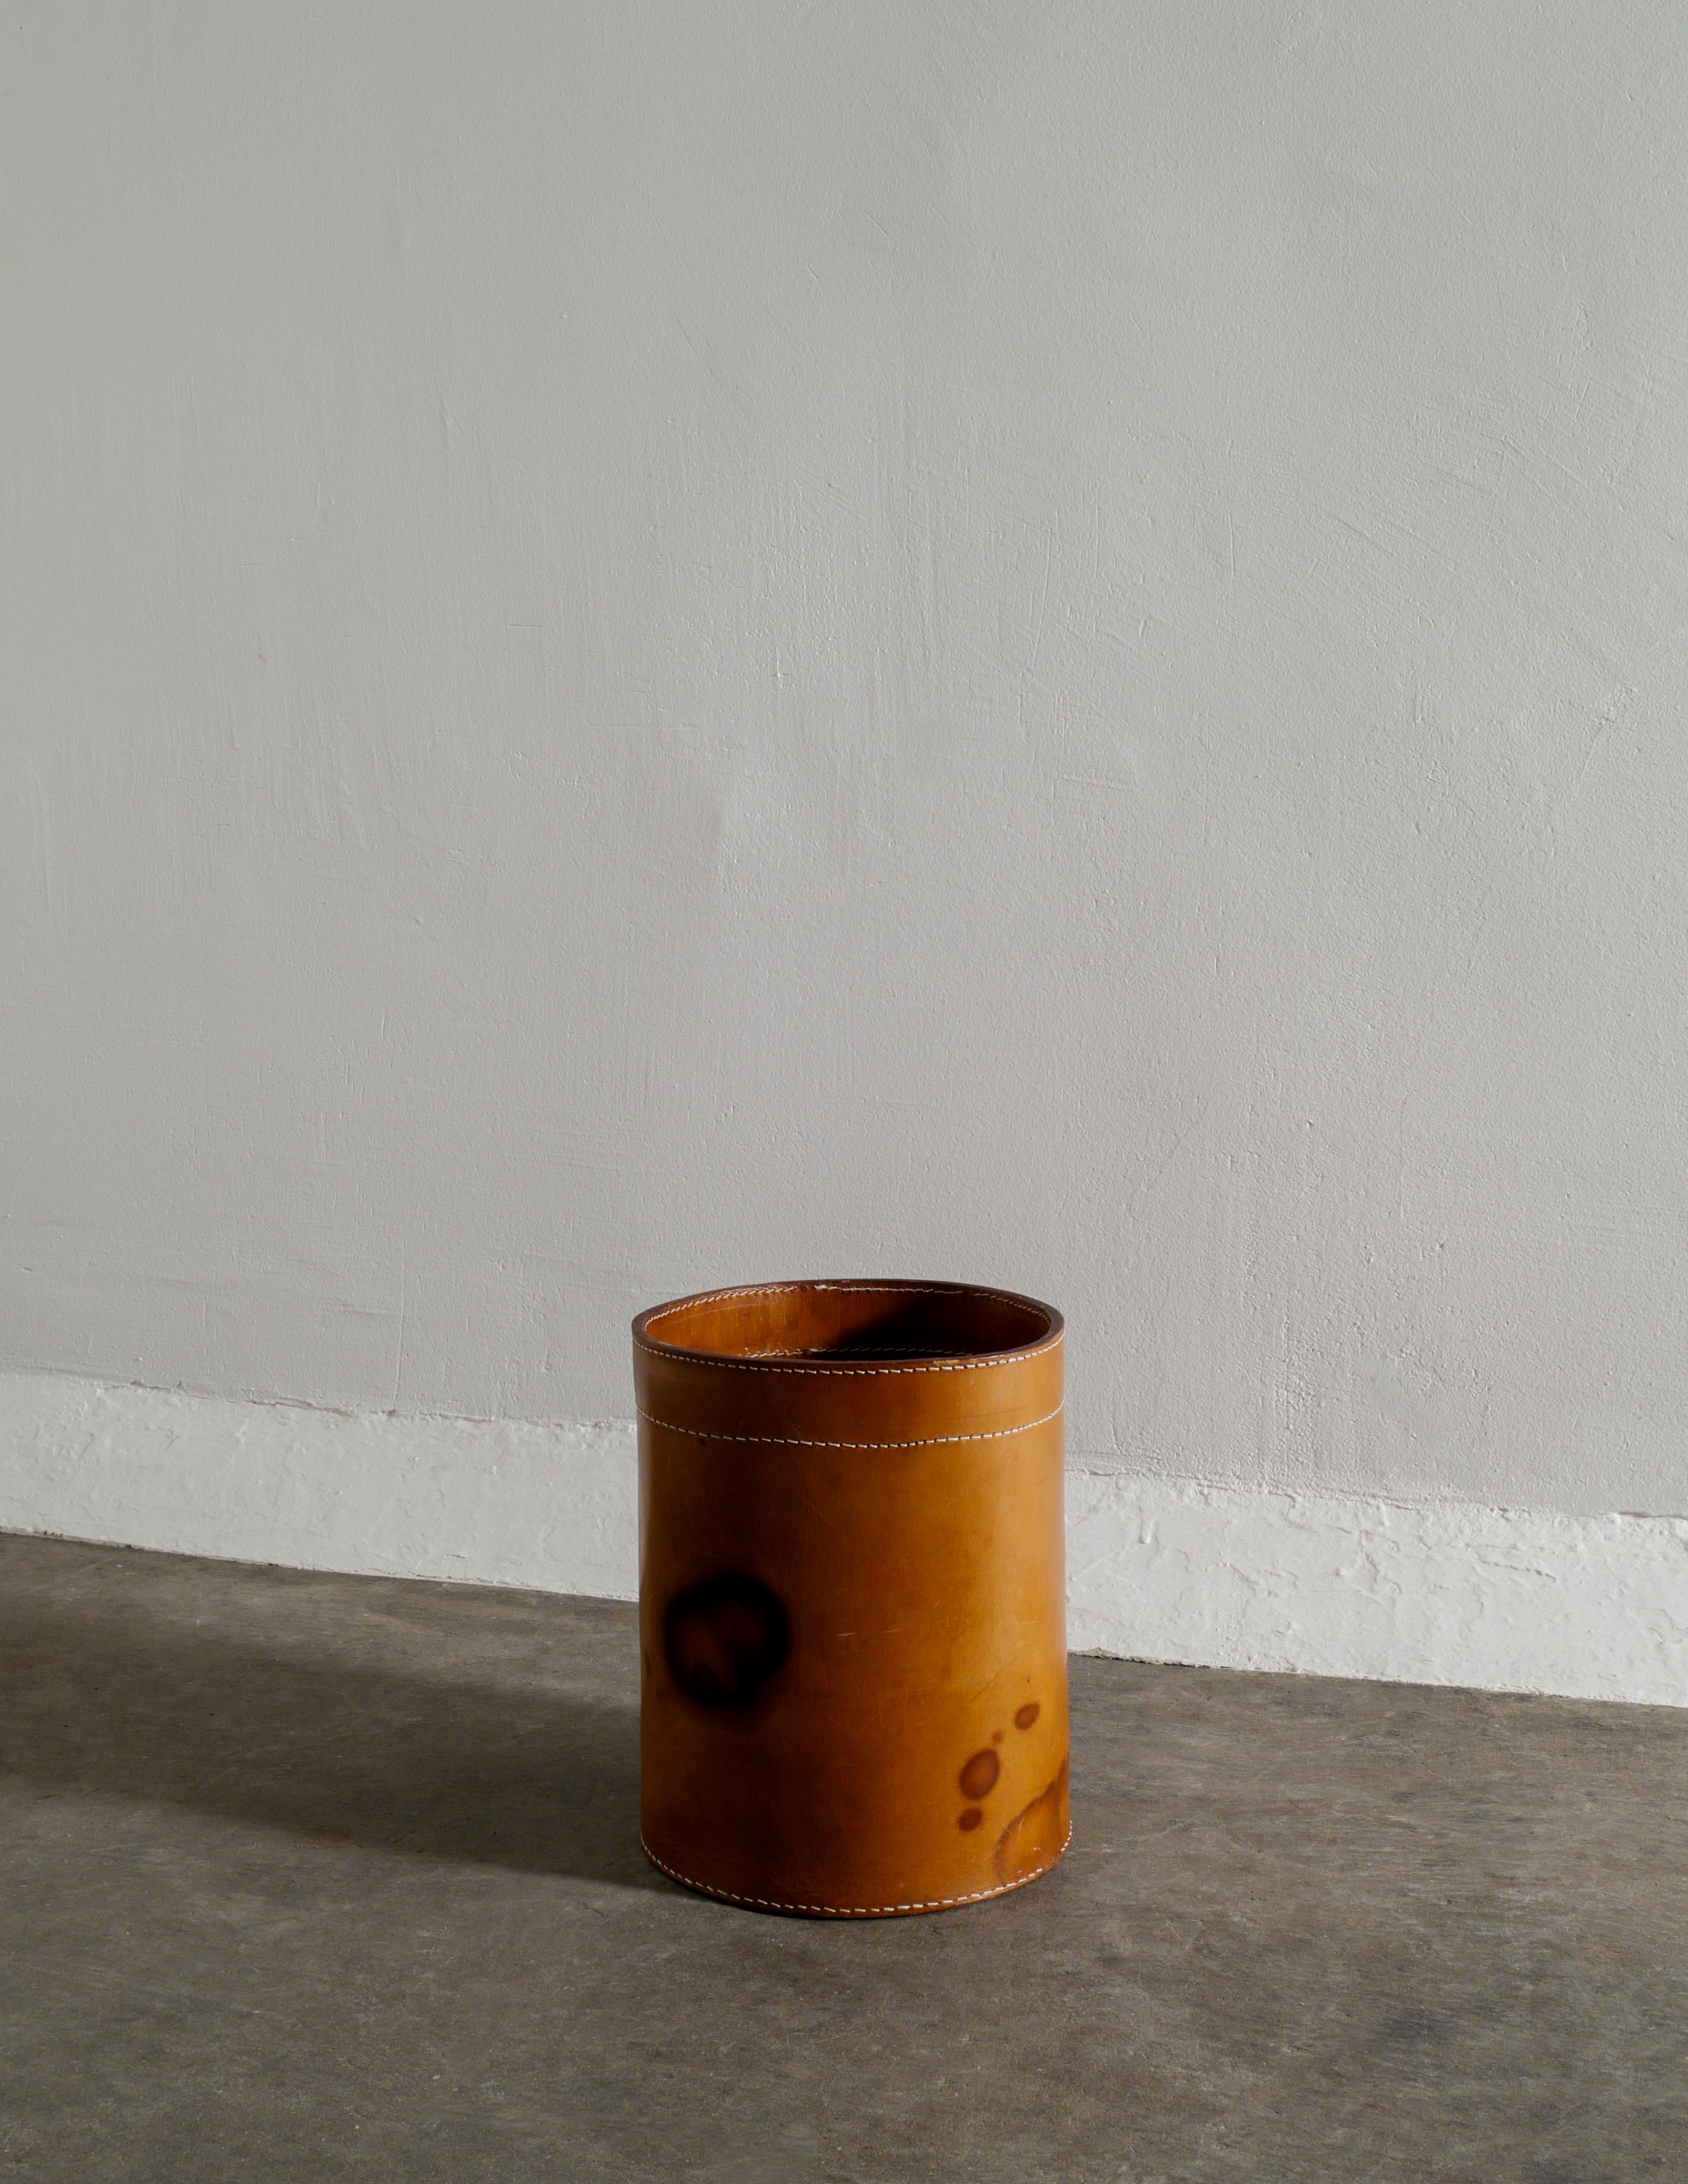 Scandinavian Modern Danish Paper Waste Bin in Patinated Leather Produced in Denmark, 1960s For Sale